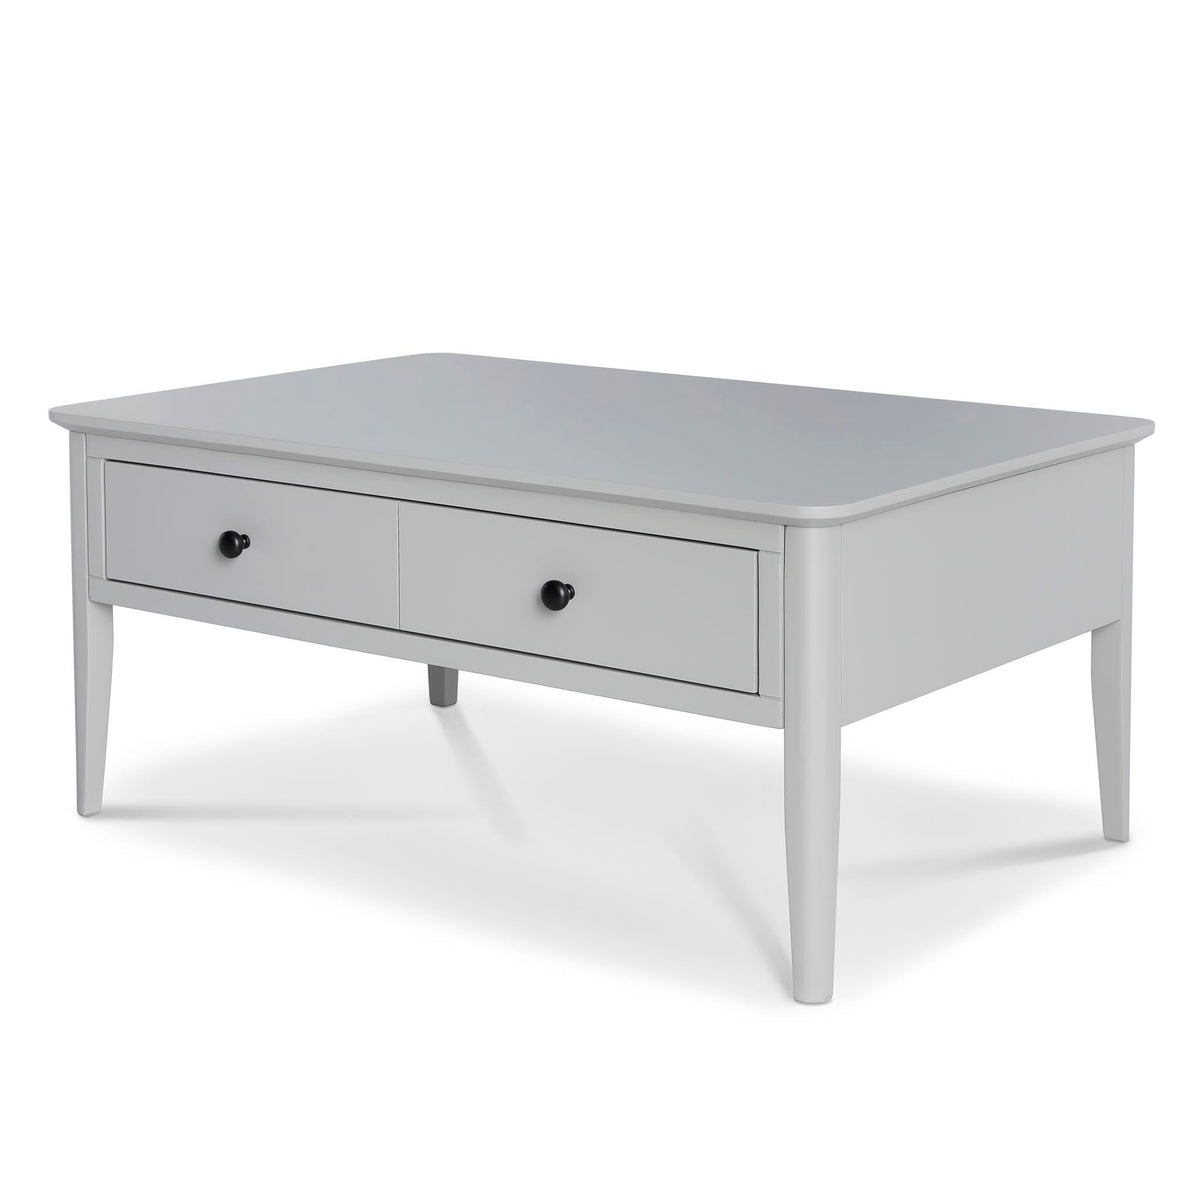 Elgin Grey Coffee Table with Drawer - Side view